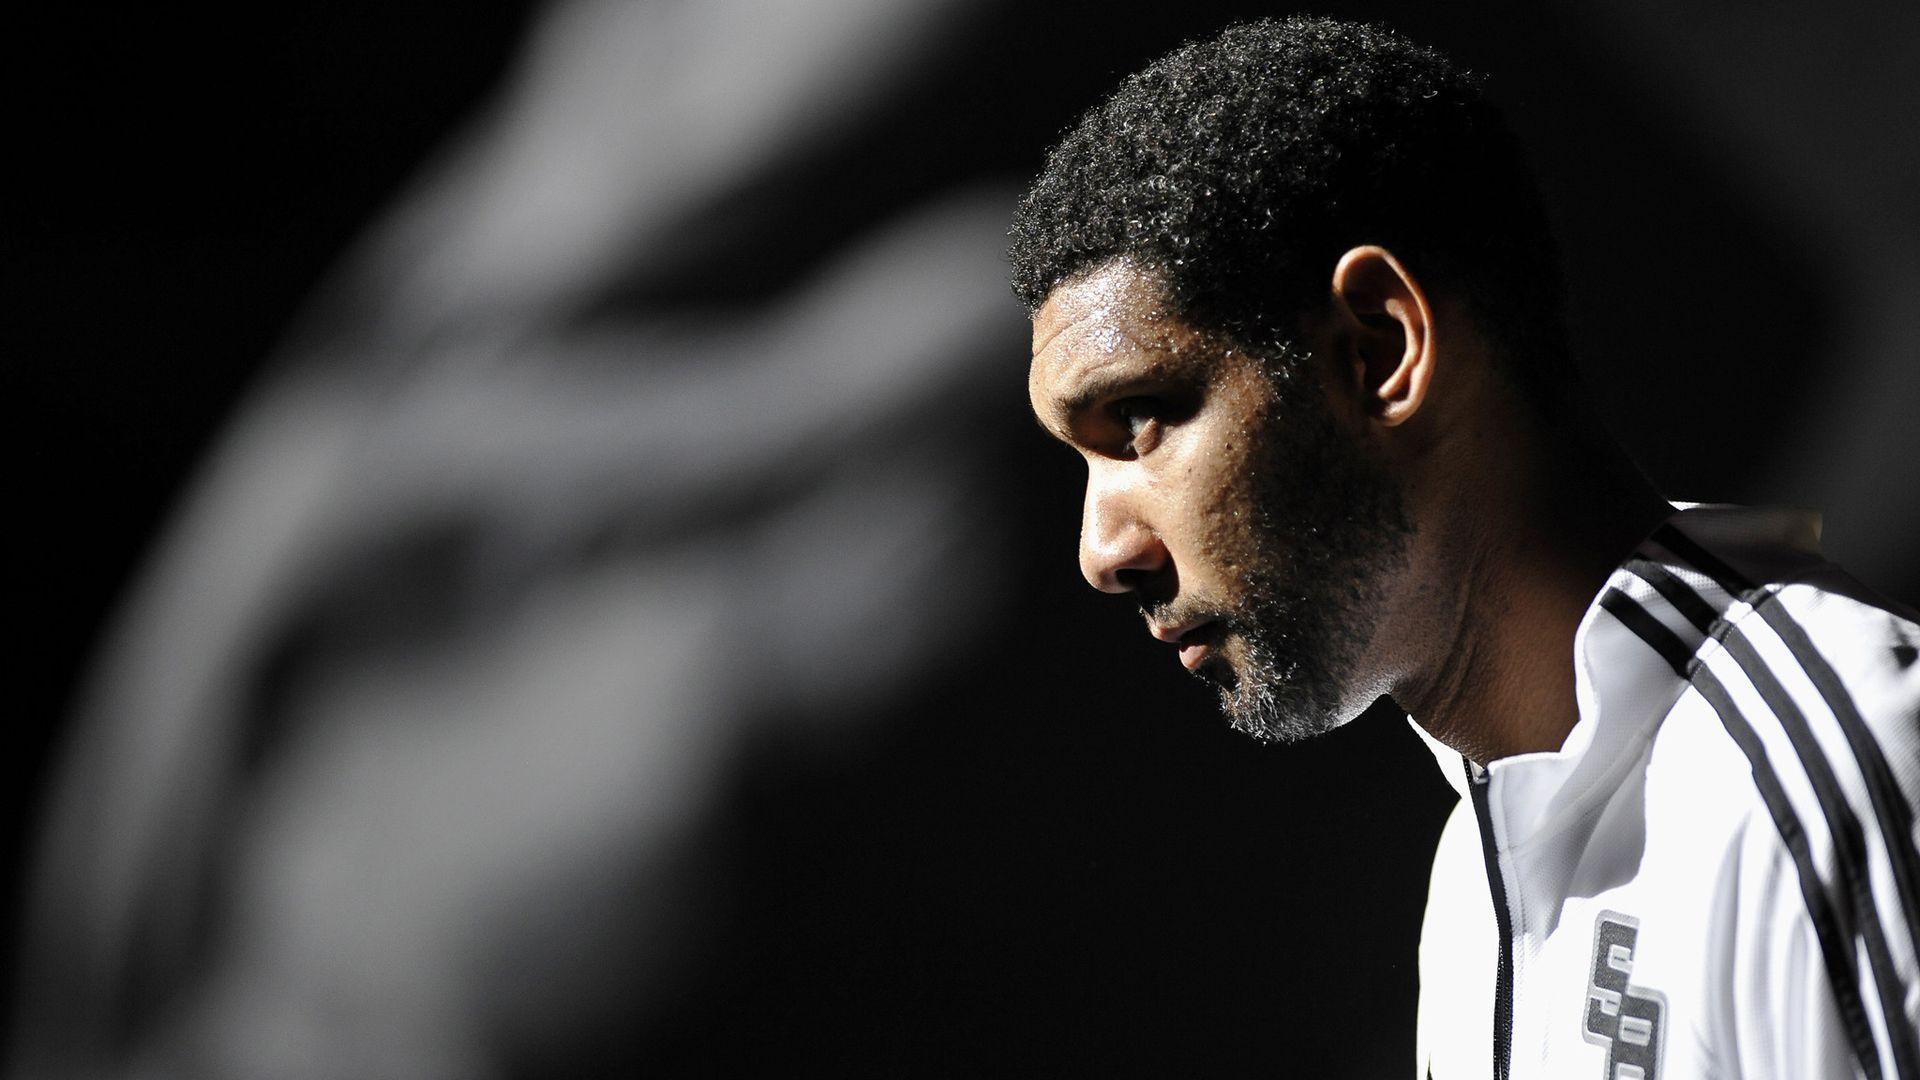 Tim Duncan Wallpaper High Resolution and Quality Download